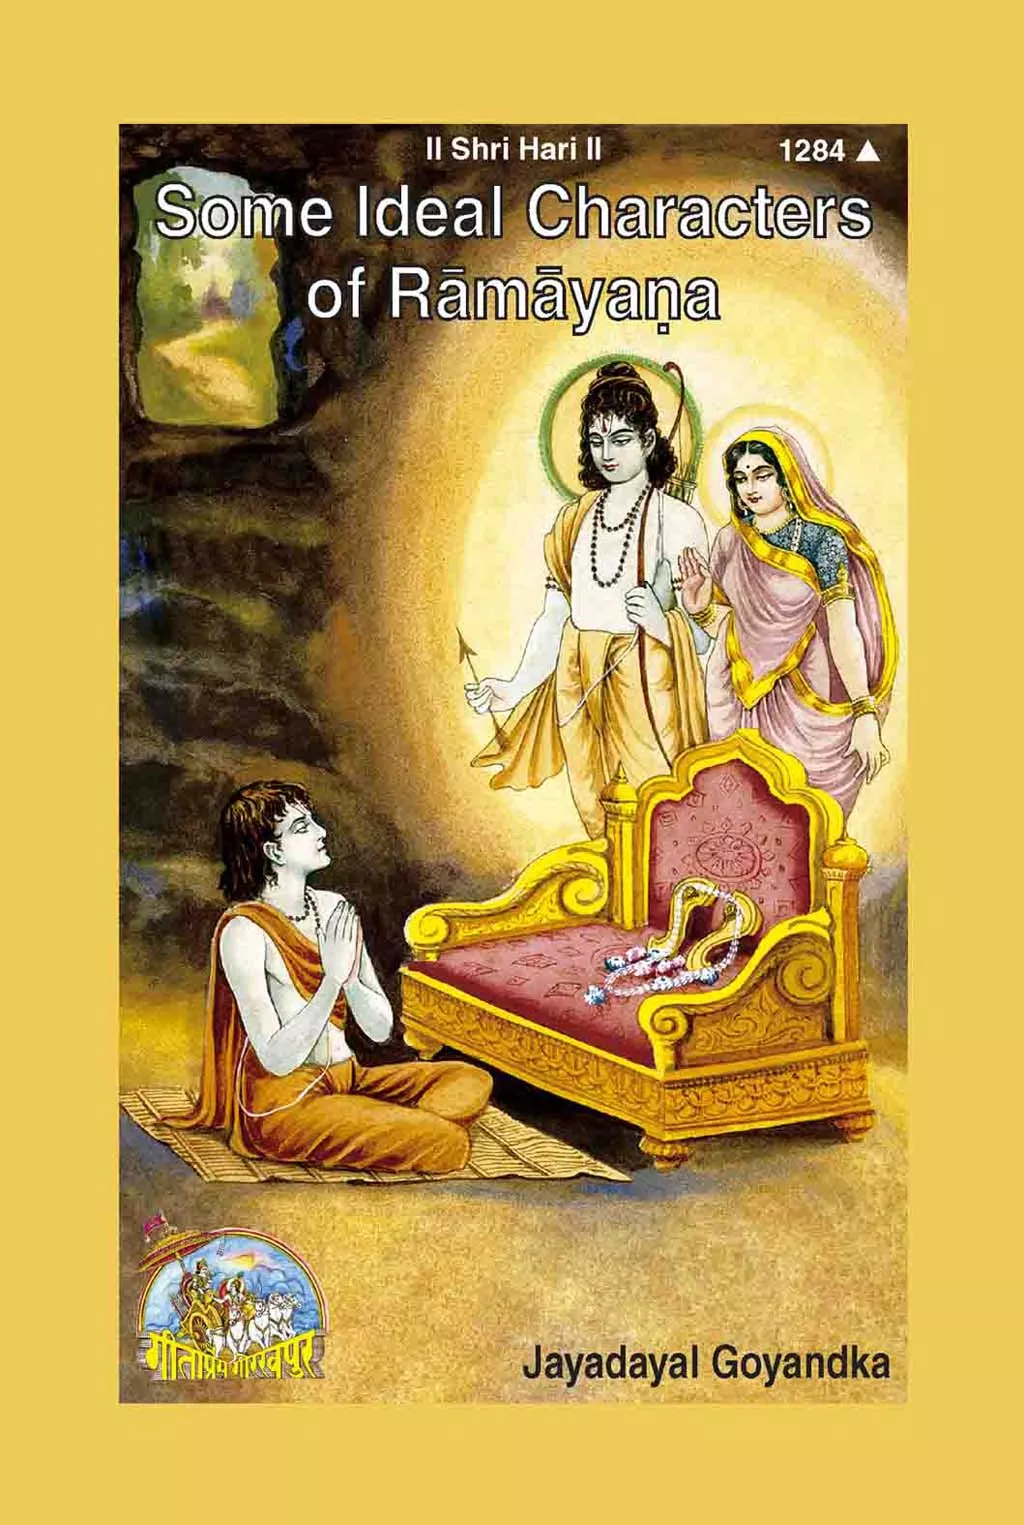 Some Ideal Character of Ramayana  (English)